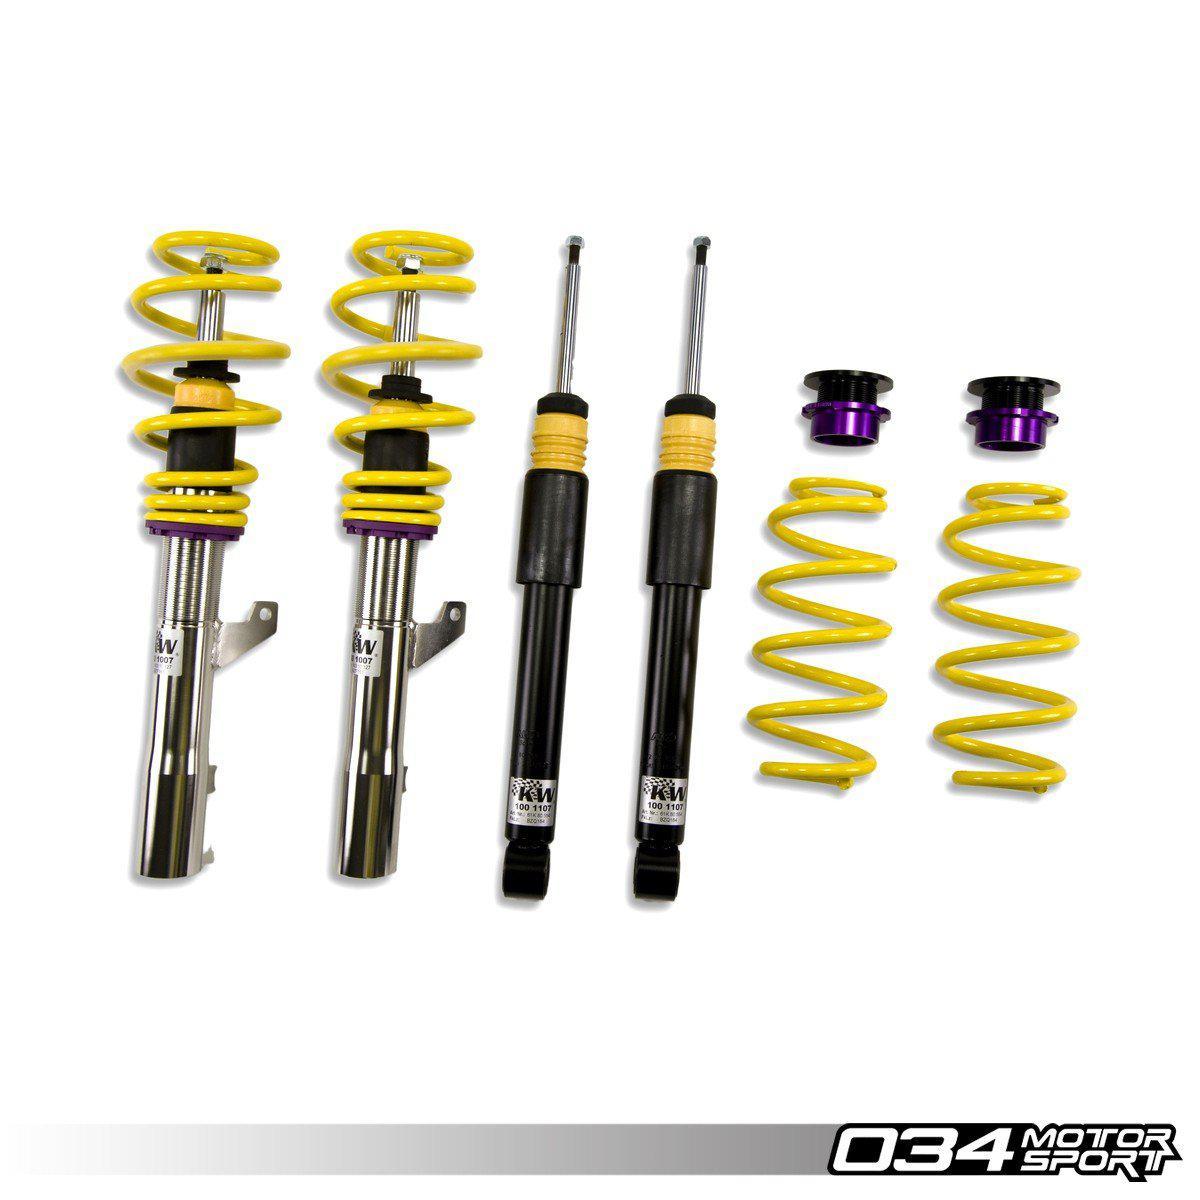 KW Variant 2 Coilover Suspension, 8p Audi A3 Quattro &amp; B6/B7 Volkswagen Passat Without Edc-A Little Tuning Co